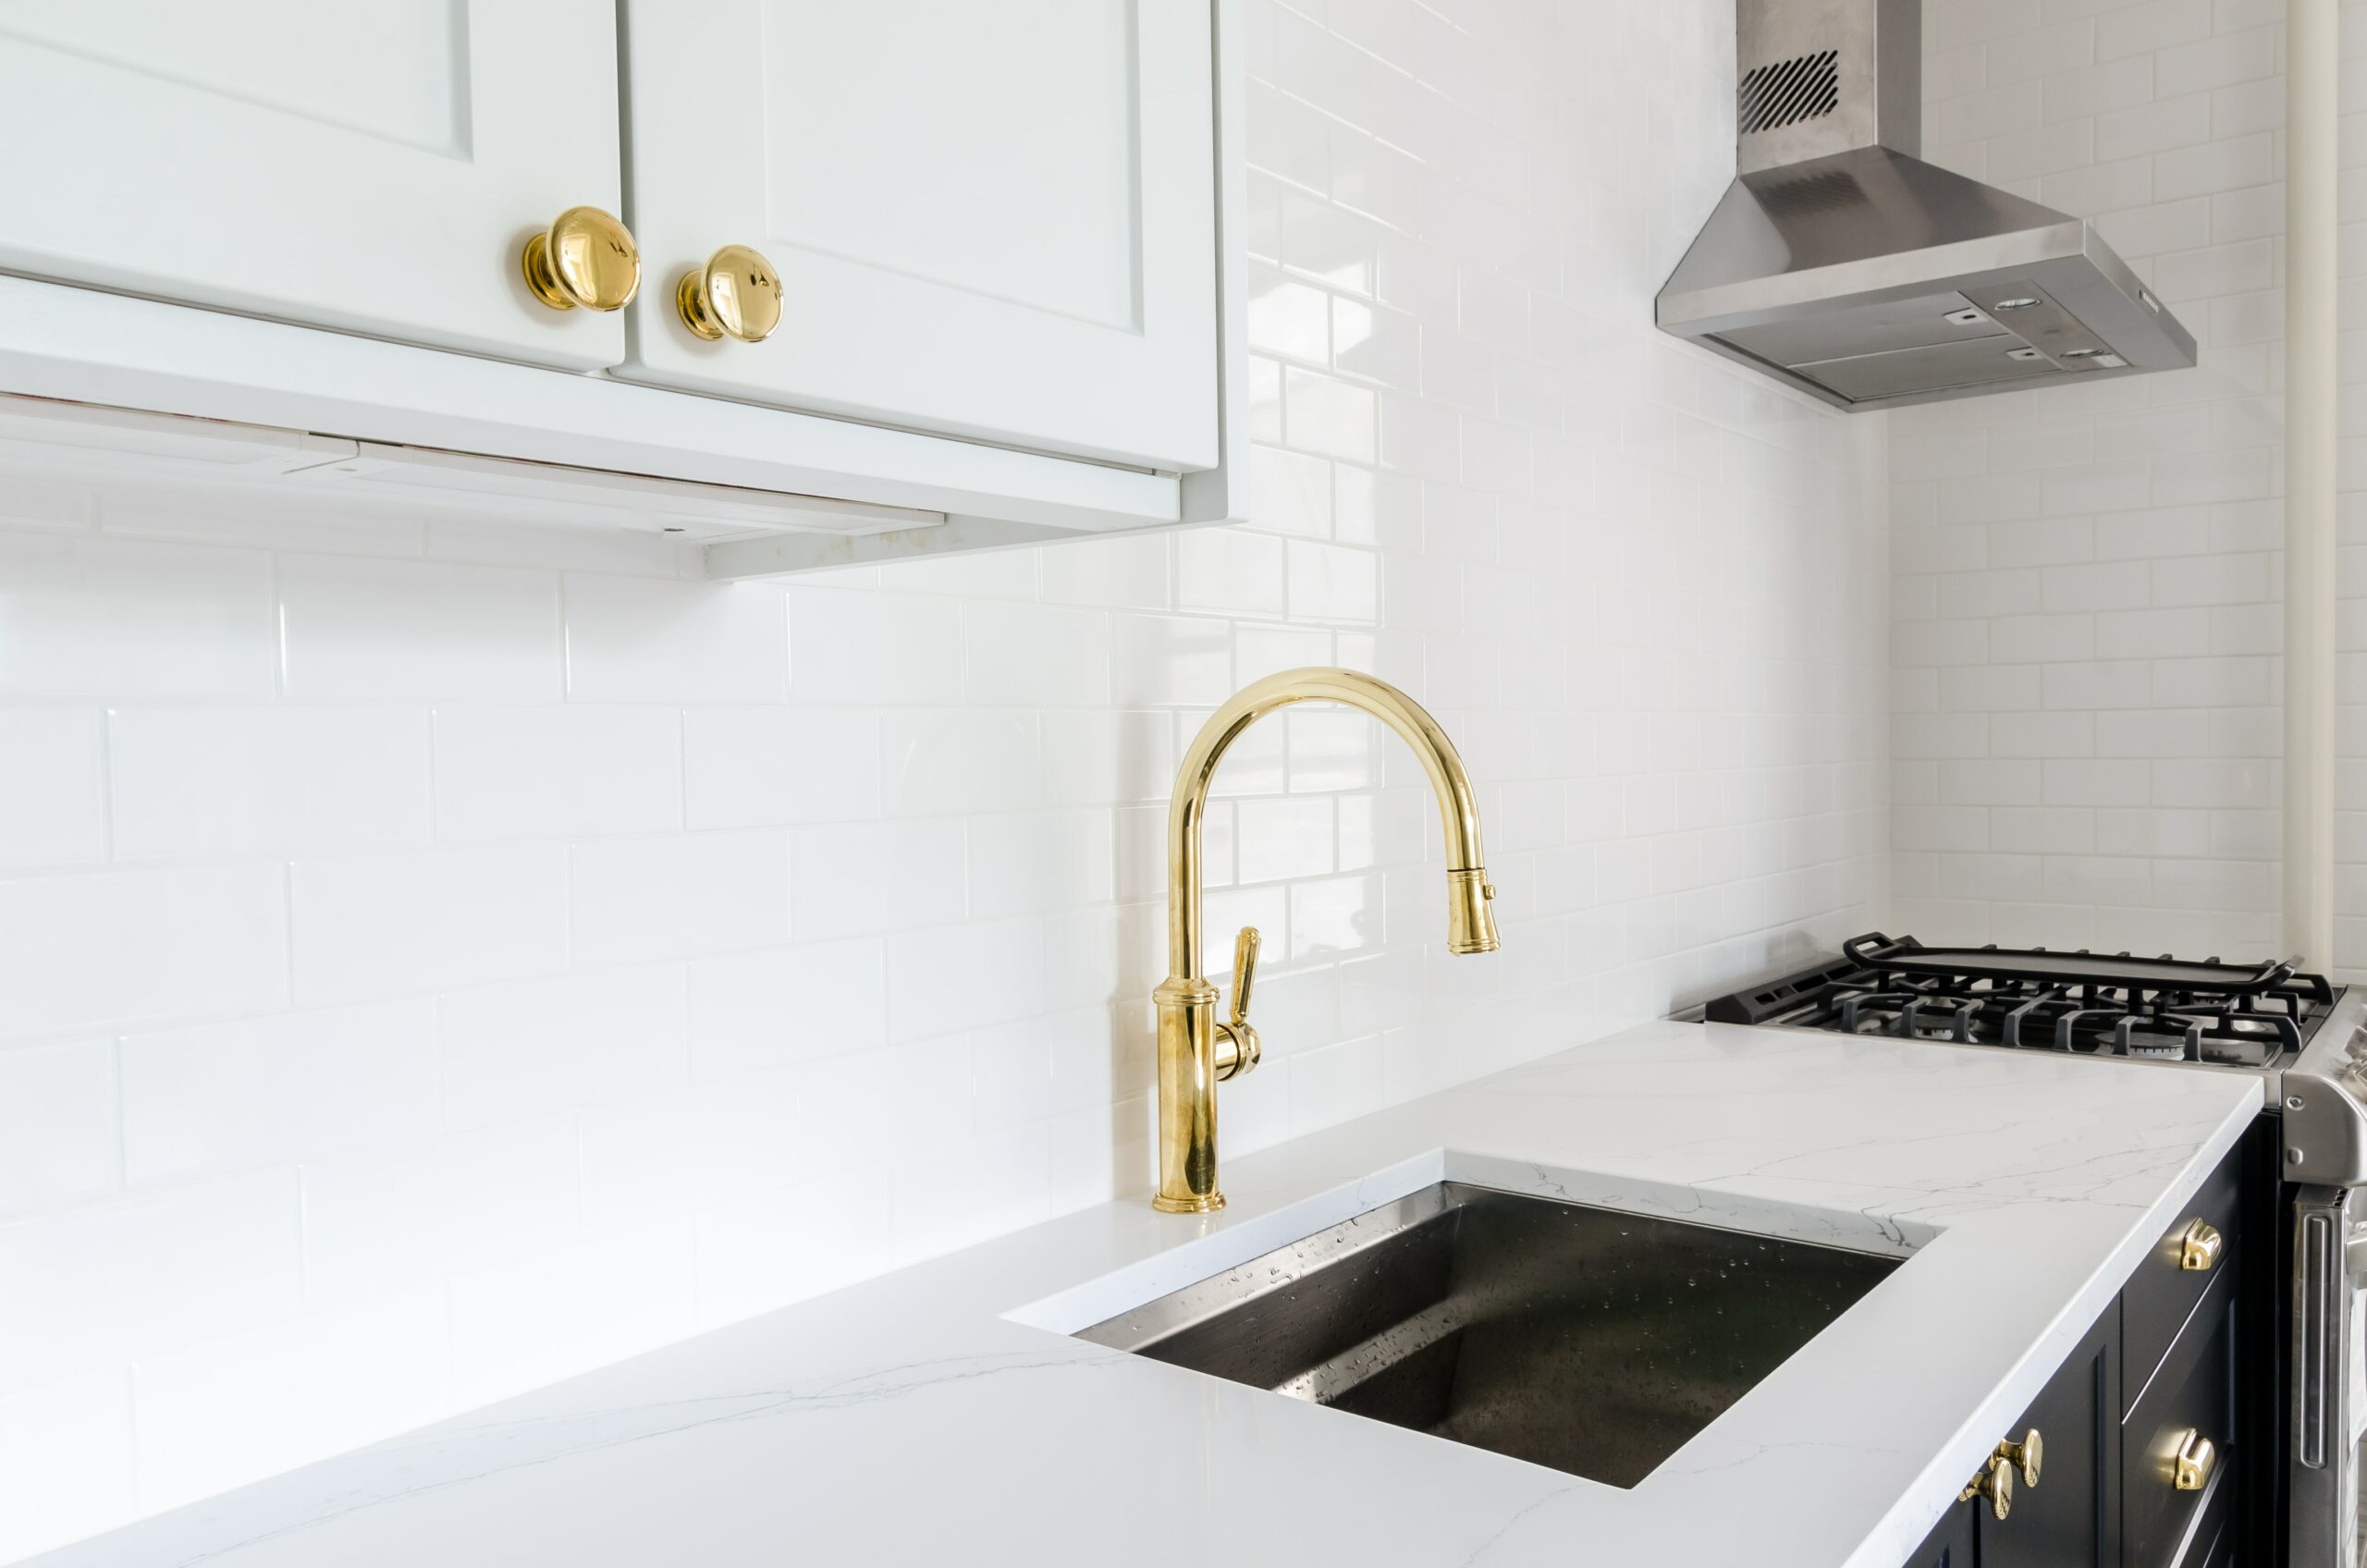 Modern SwiftUK kitchen with white worktop and gold taps